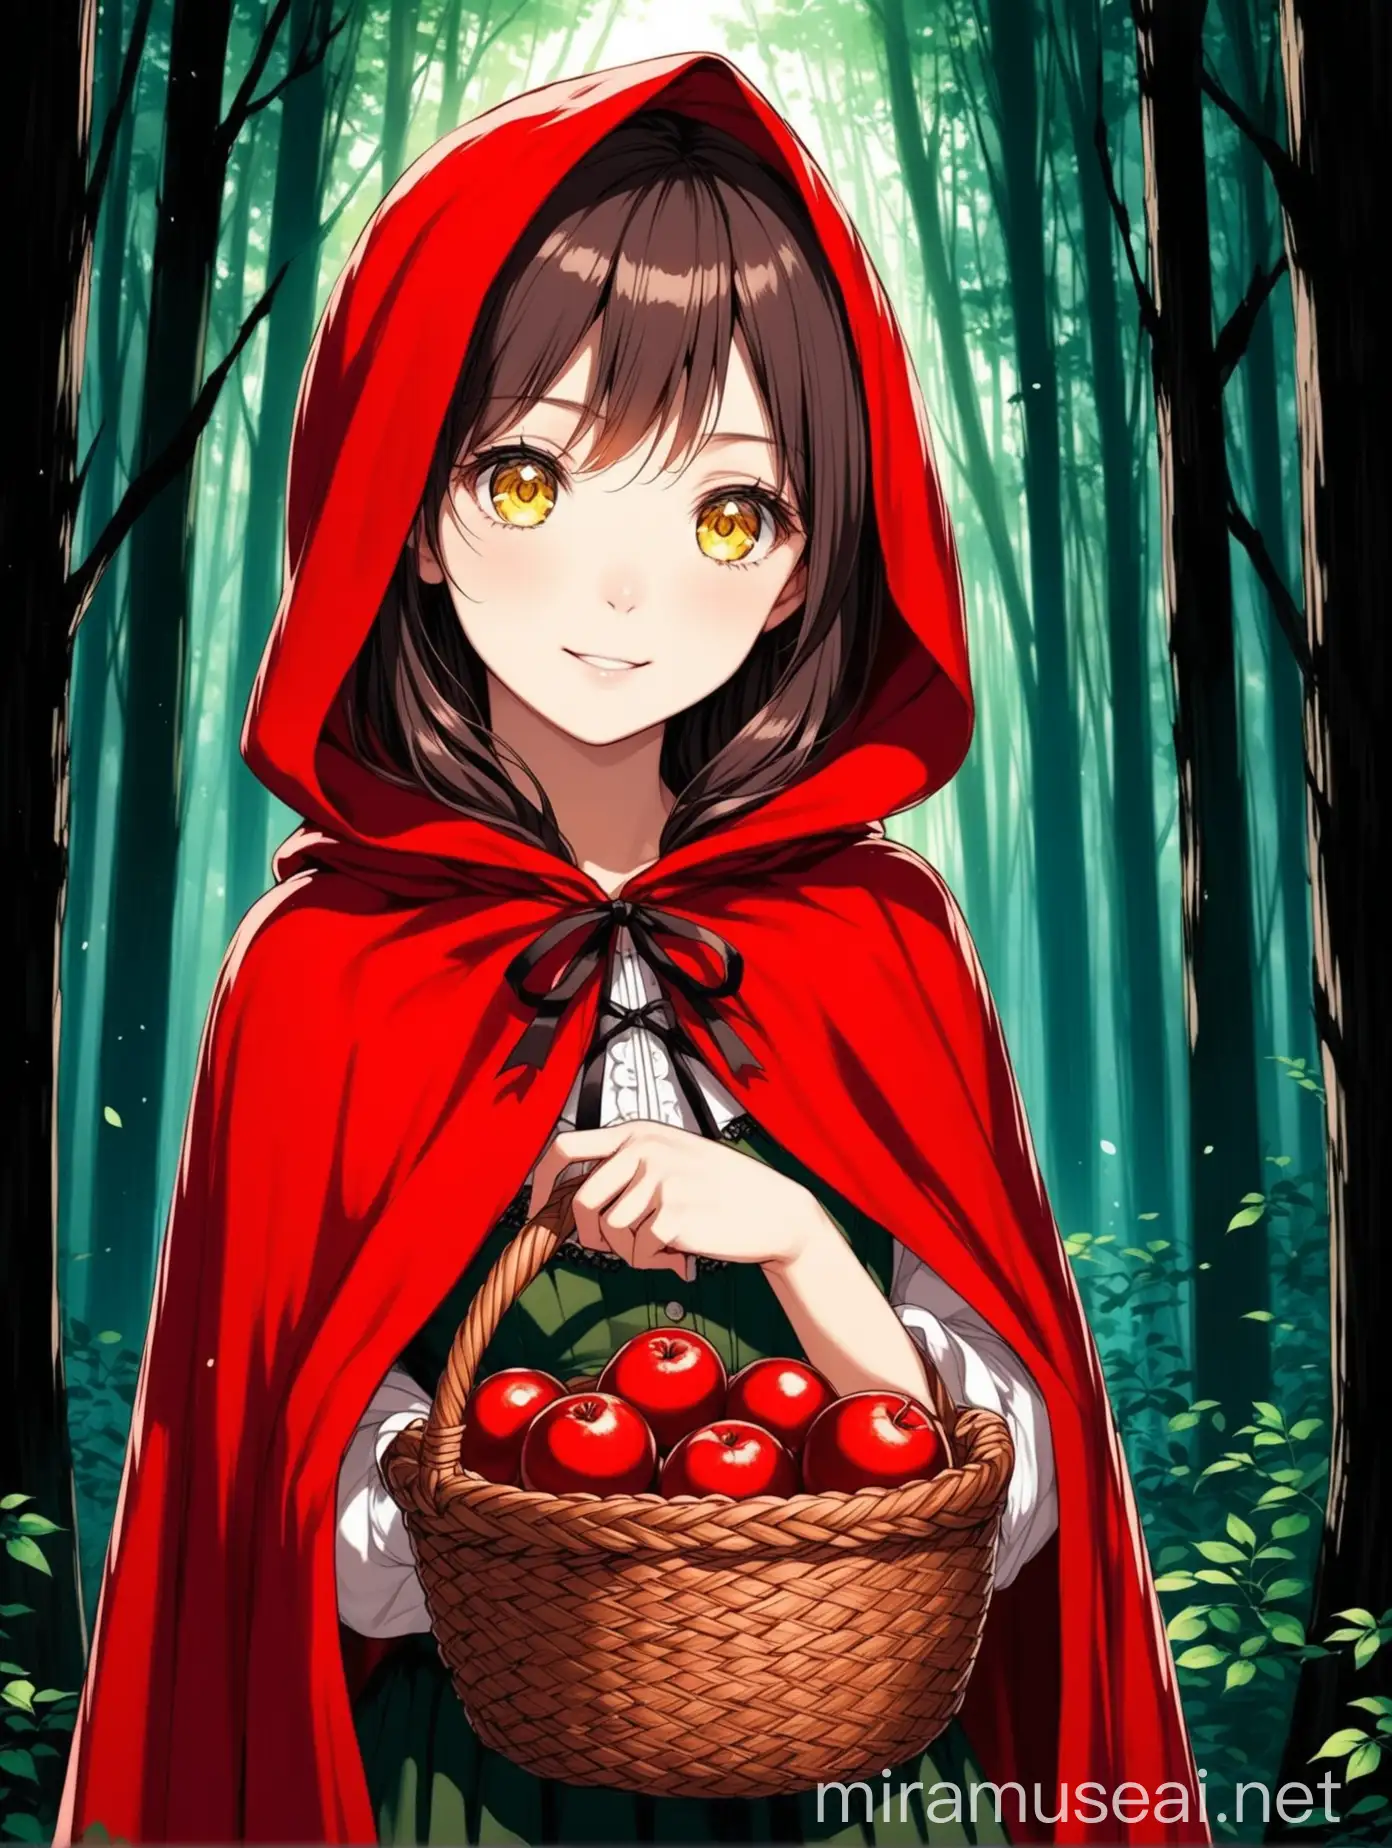 Anime portrait of red riding hood teenager girl, dark forest on background, bright yellow eyes, red cape, closed basket in hands, innocent smile